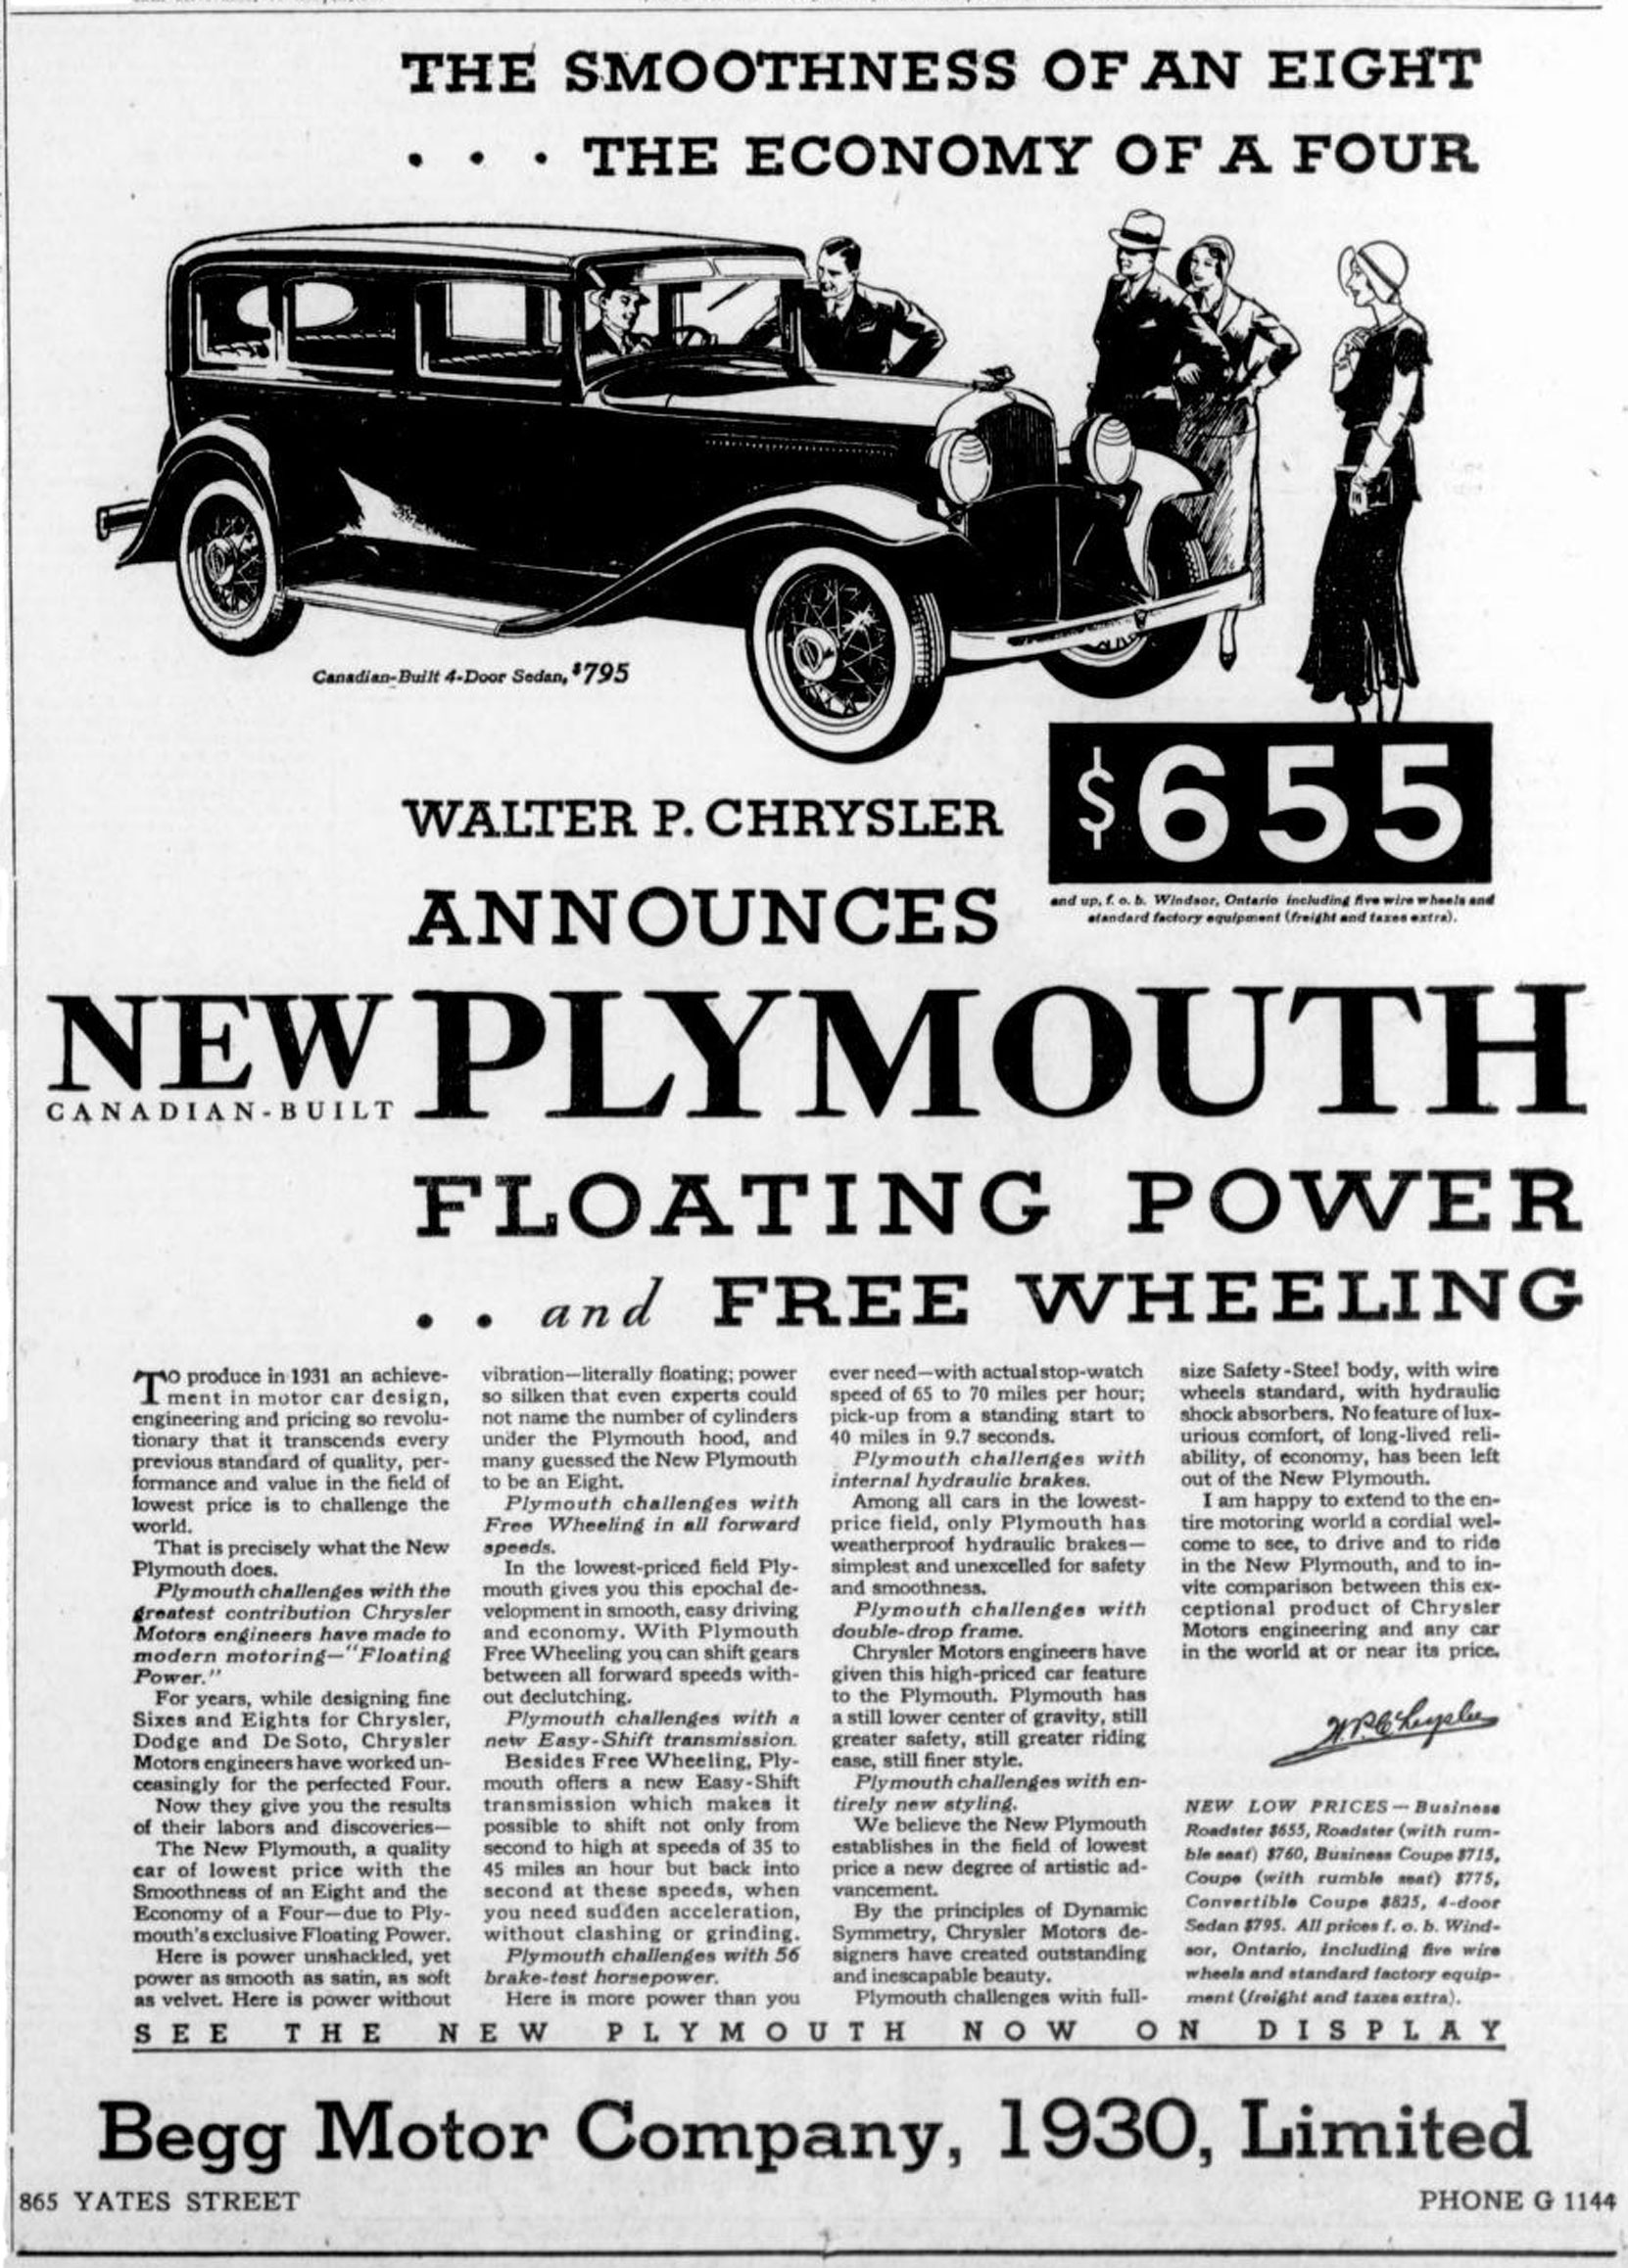 1931 advertisement for Plymouth, by the Begg Motor Company Ltd, 865 Yates Street Victoria Online Sightseeing Tours collection)